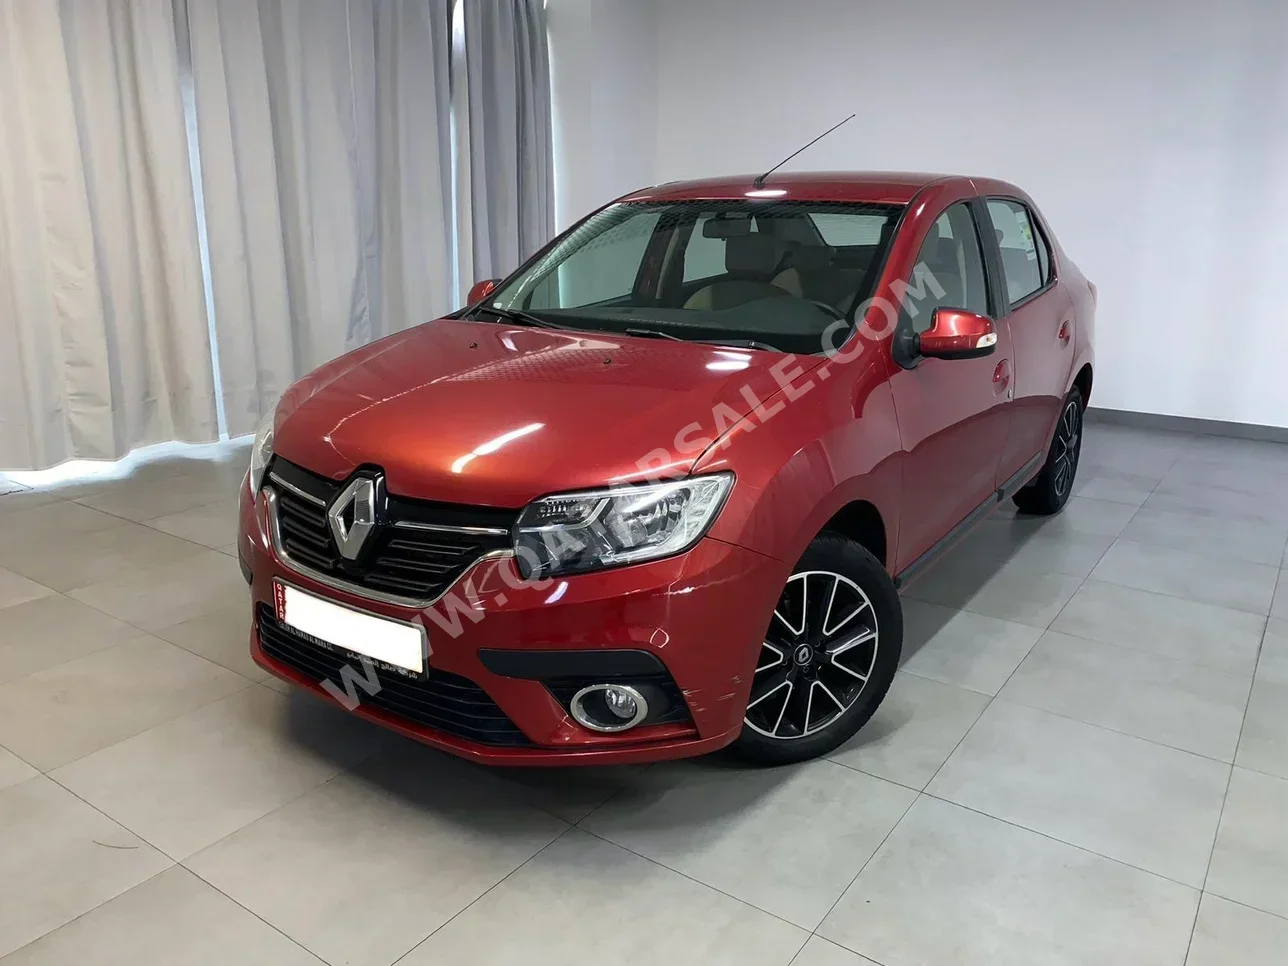 Renault  Symbol  2017  Automatic  46,890 Km  4 Cylinder  Front Wheel Drive (FWD)  Sedan  Red